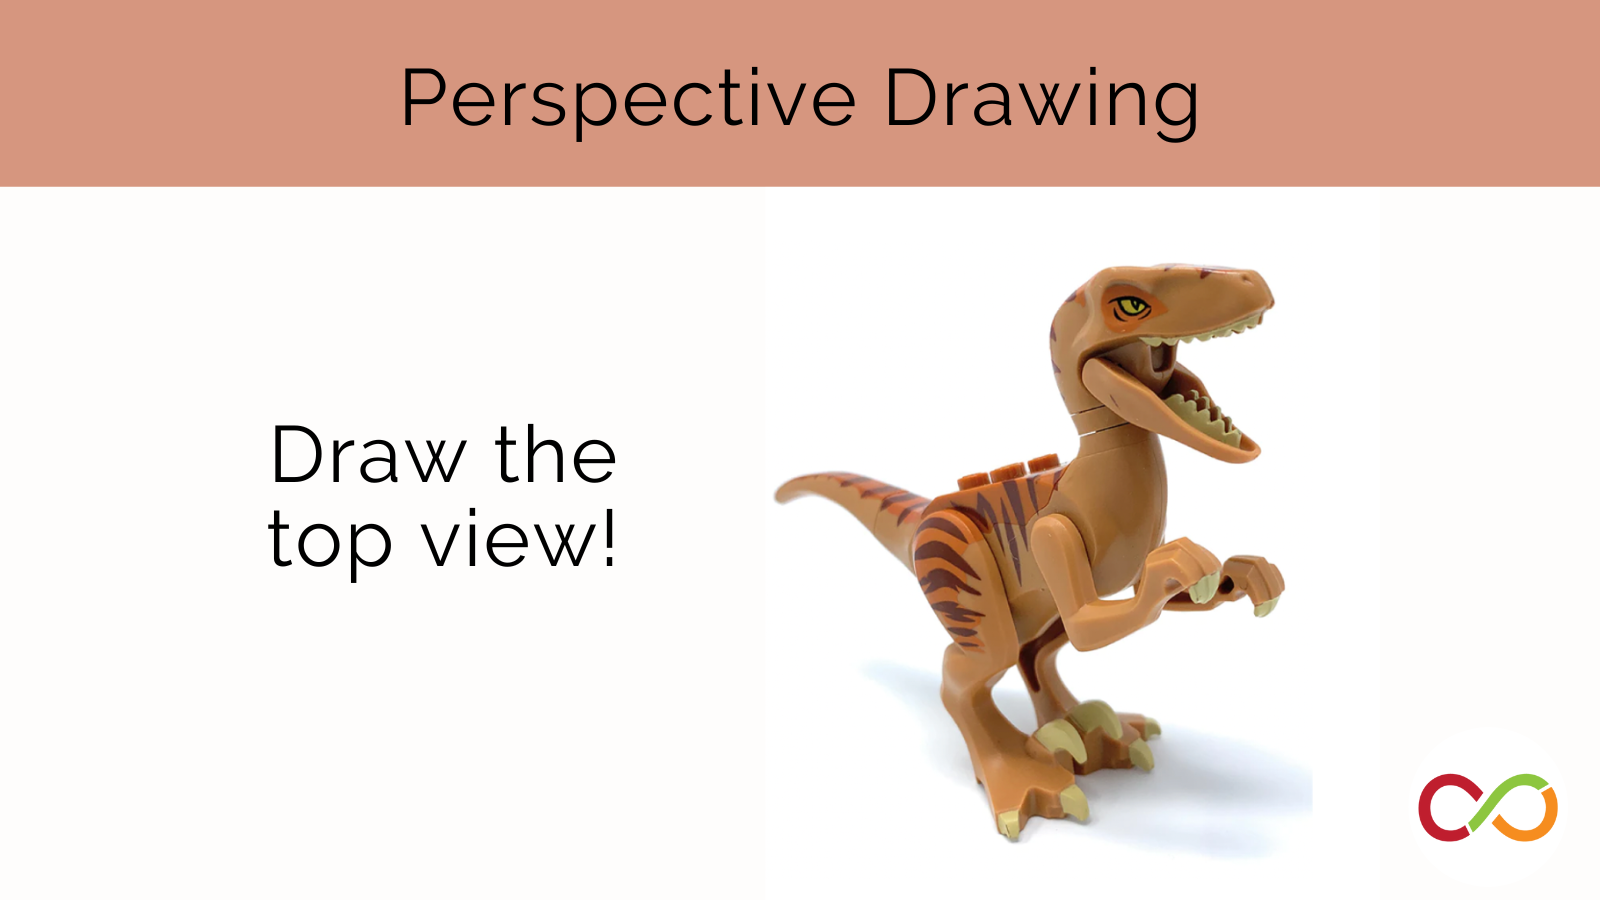 An image linking to the perspective drawing lesson